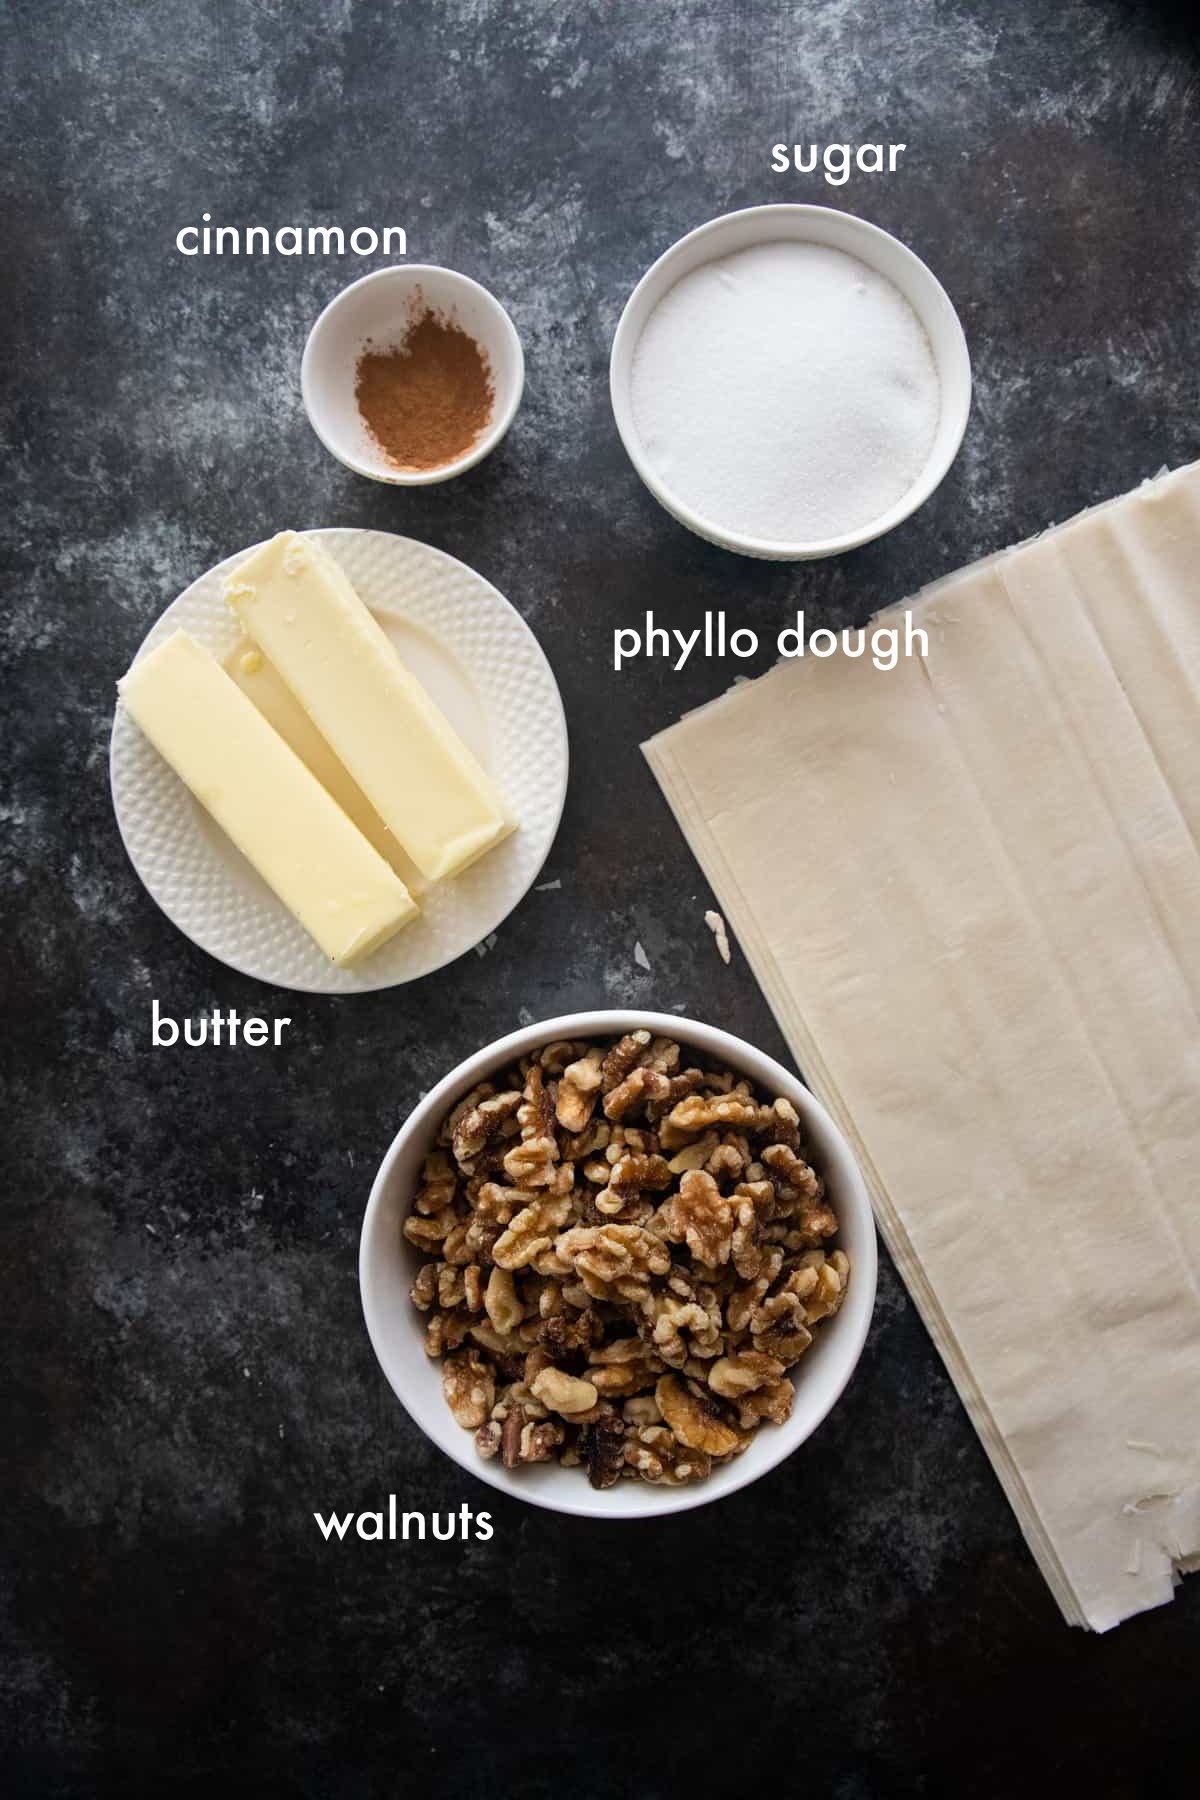 to make baklava you need butter, phyllo dough , walnuts and sugar. 